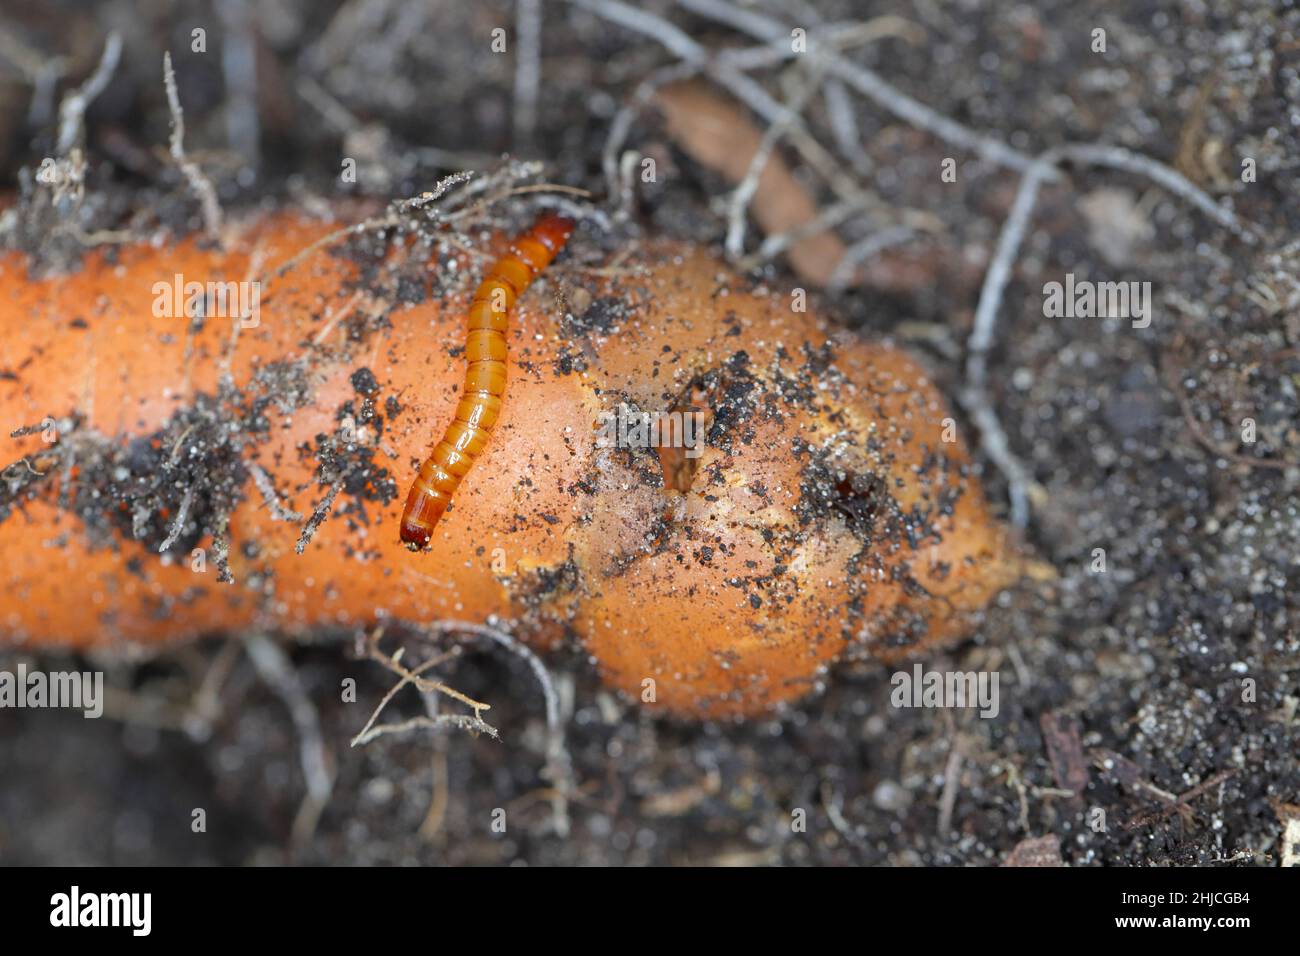 Carrot root destroyed by larvae of Elateridae - Click beetles family called wireworms. Stock Photo